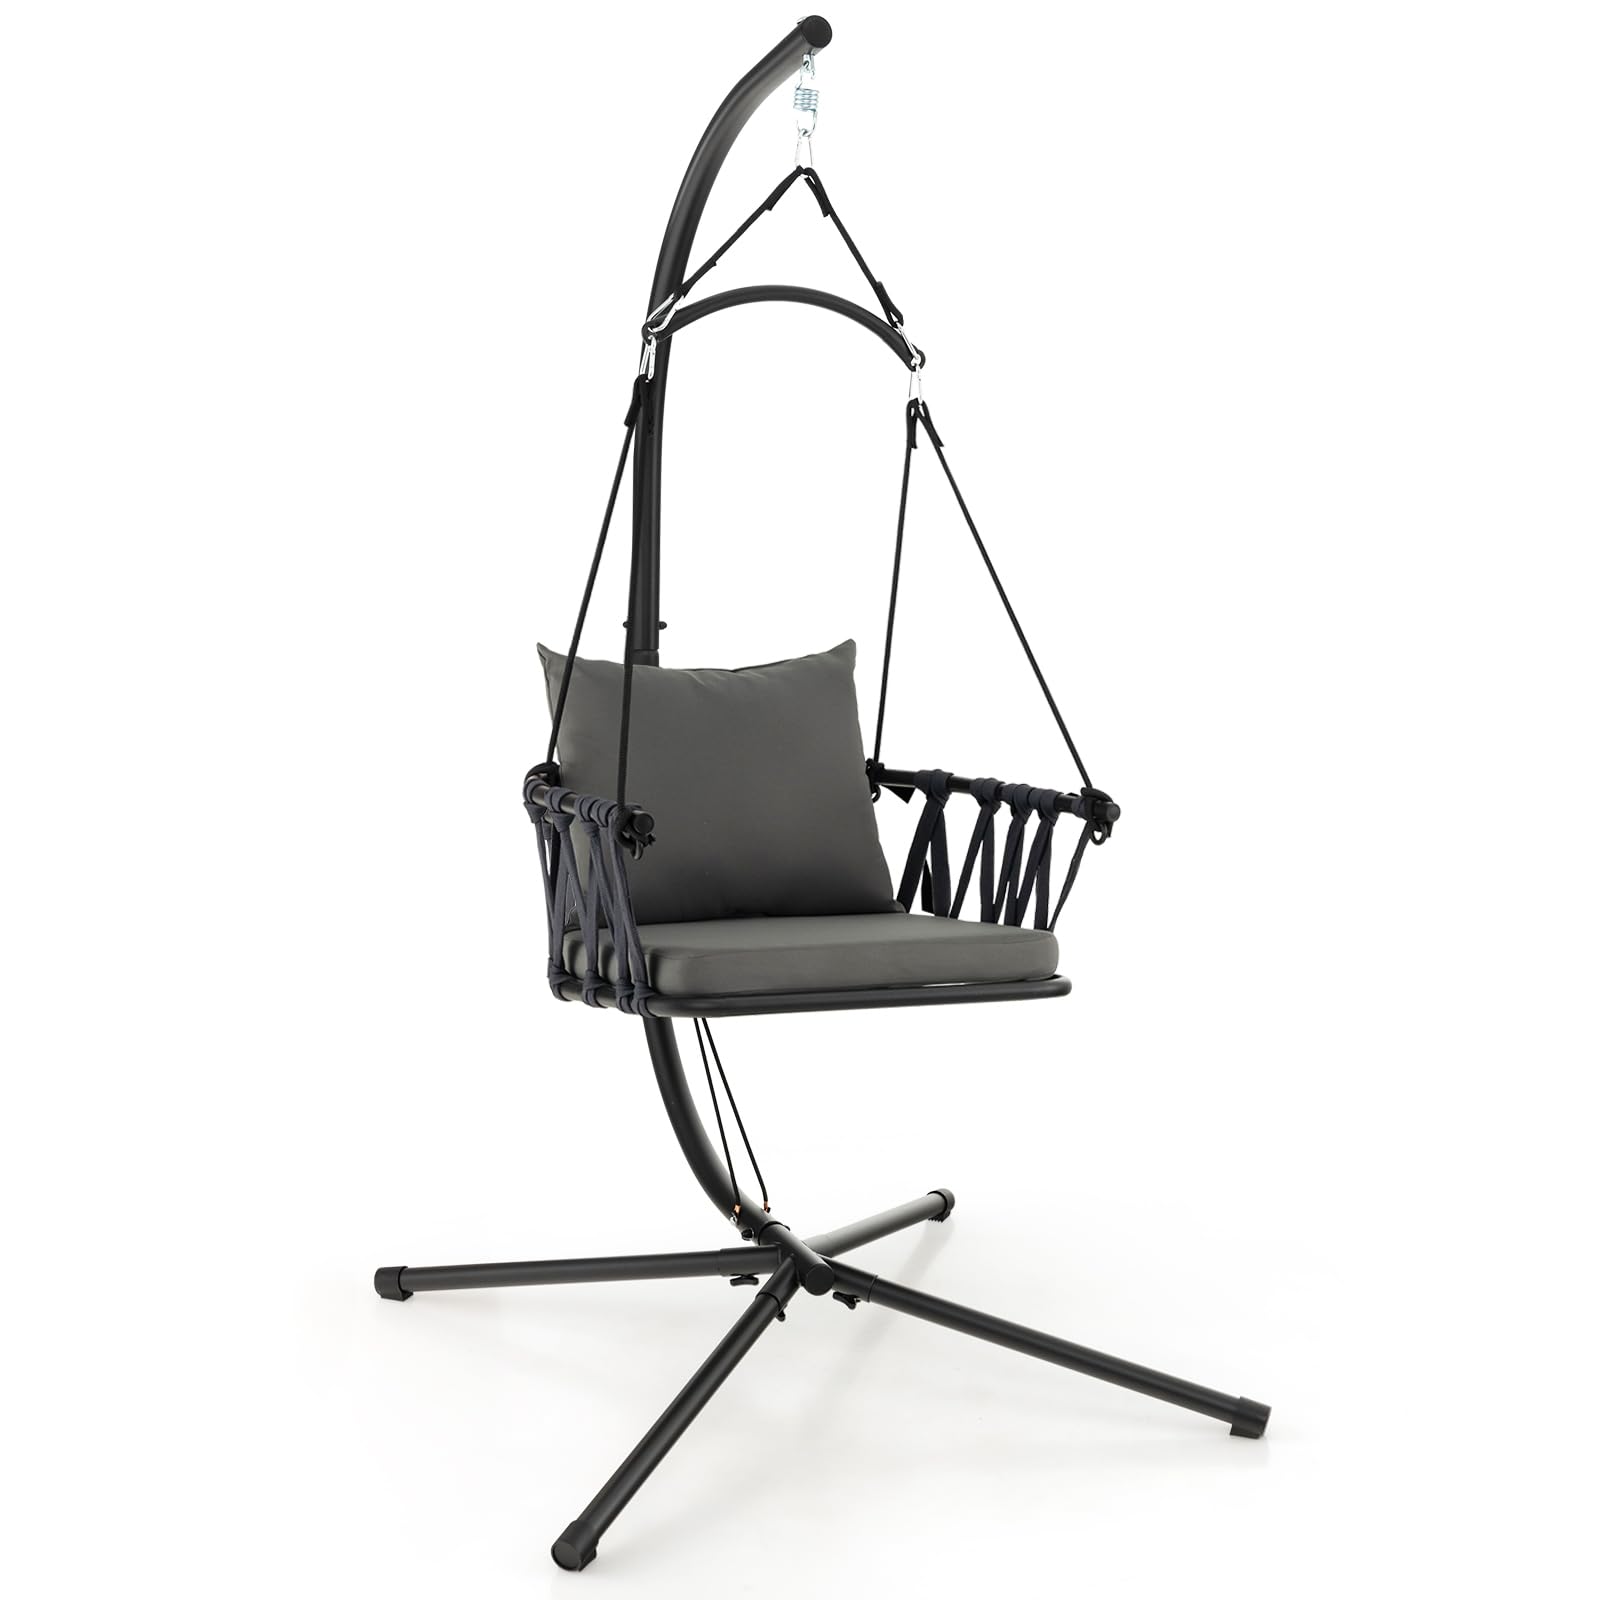 Giantex Hanging Swing Chair W/Stand, Cozy Seat & Back Cushions